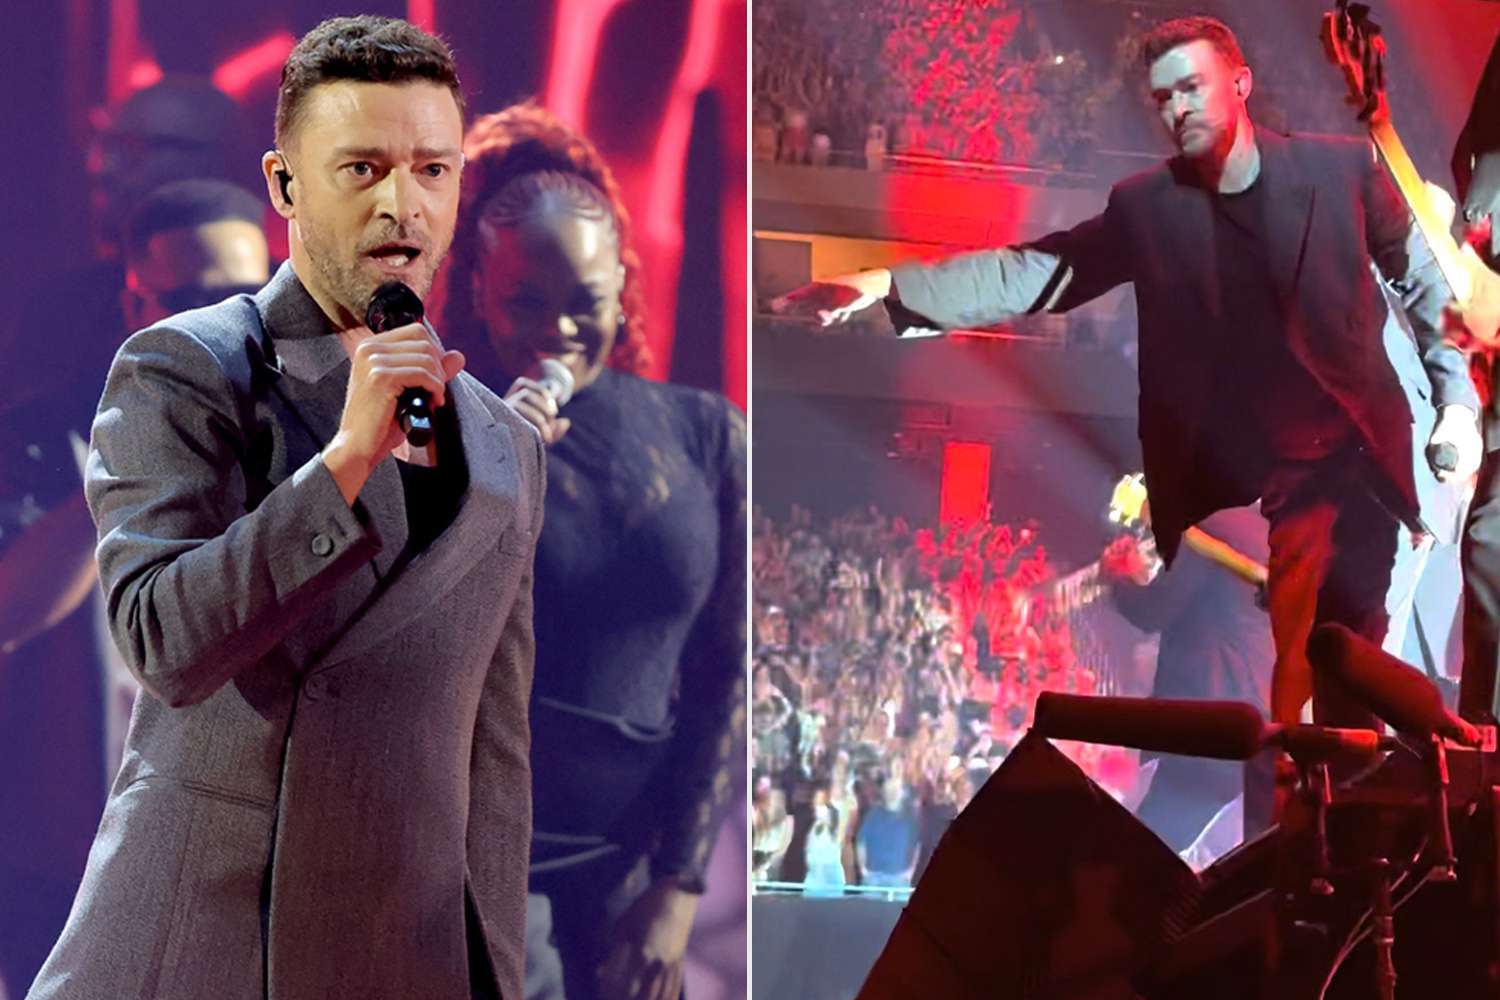 Justin Timberlake Halts Texas Tour Stop to Help Fan in Need of Assistance: 'House Lights Up'